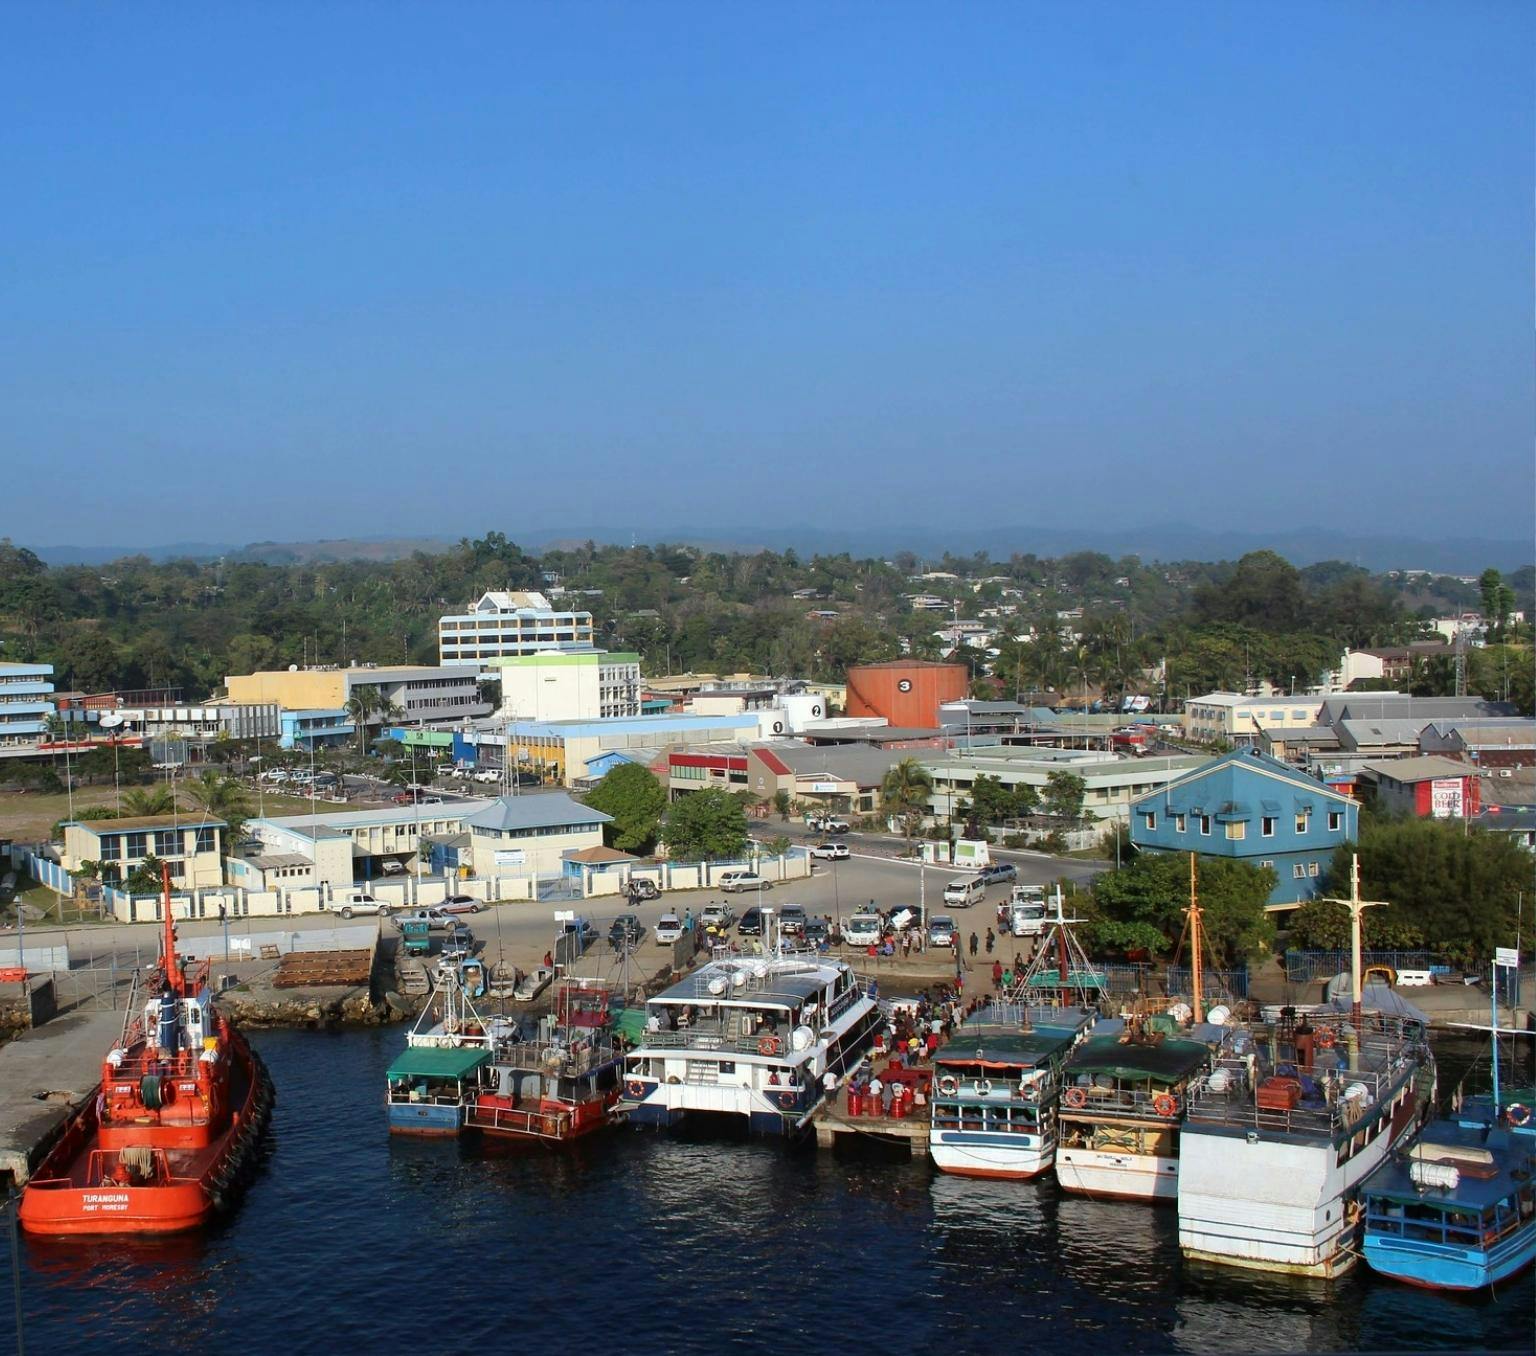 view of a port with various boats docked. Behind are buildings, and a blue sky